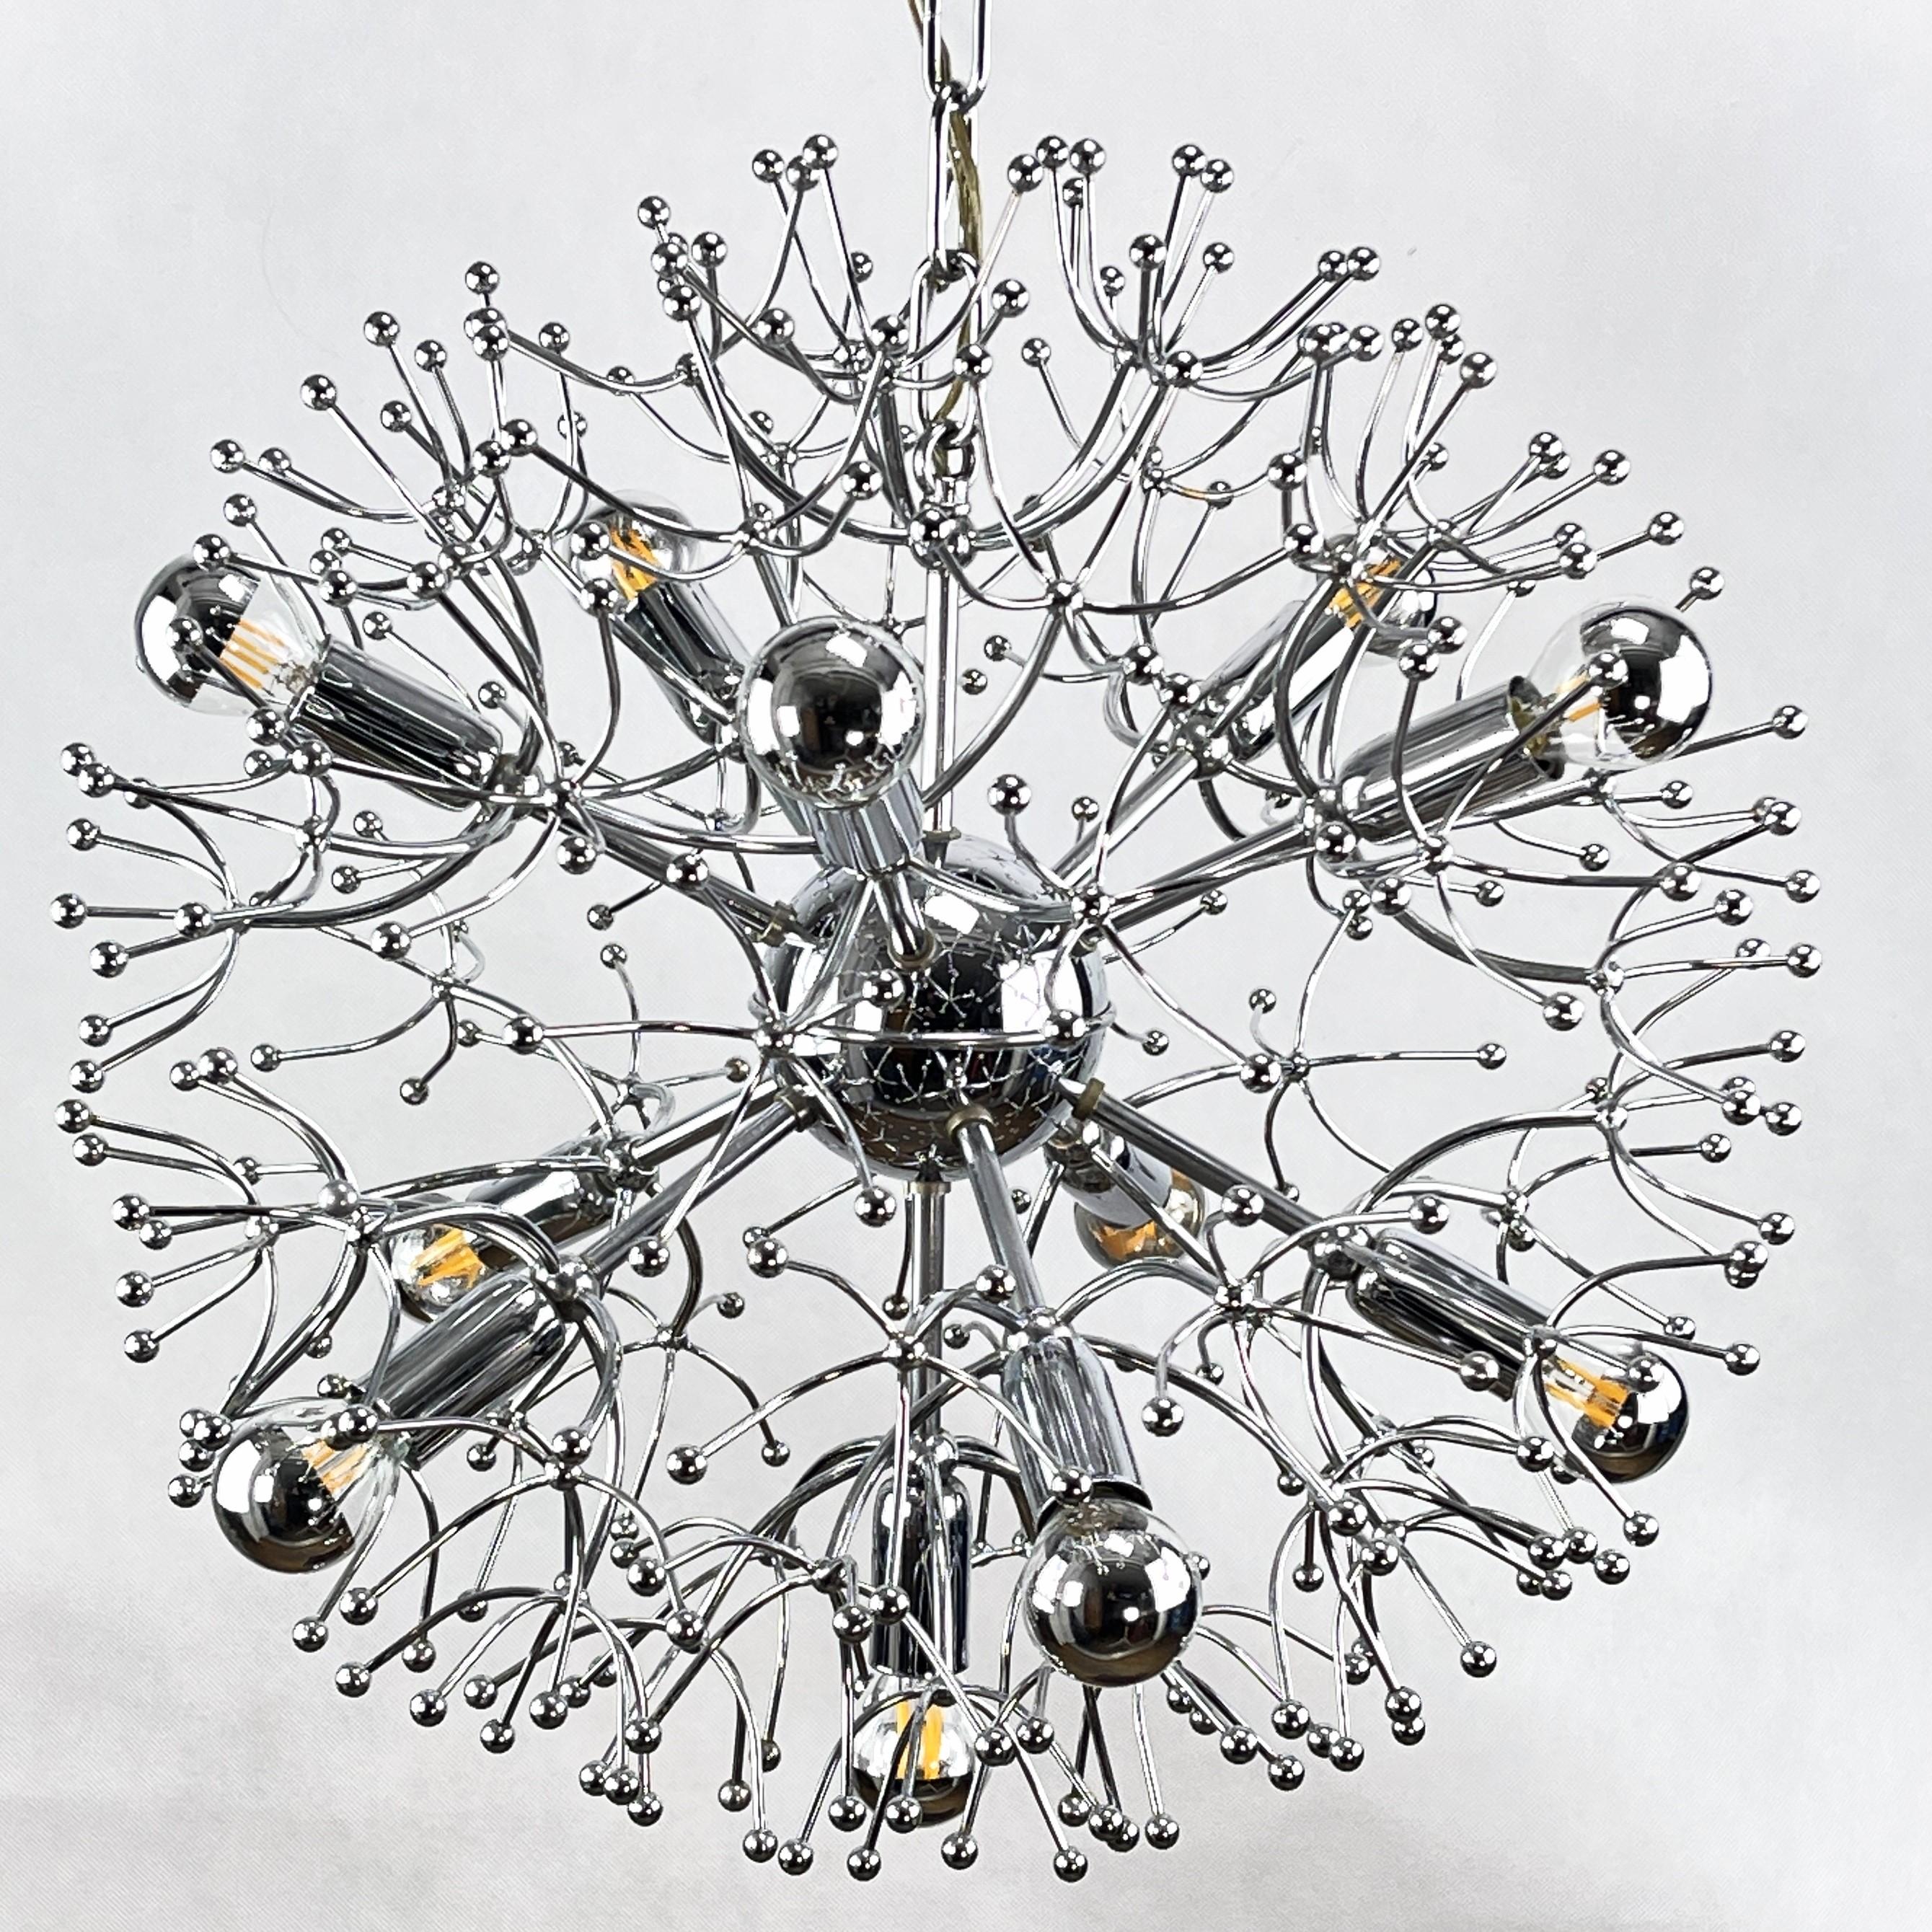 Sputnik ceiling lamp by Sciolary - 1970s.

This large sputnik lamp is a real design classic from the 60s/70s. The lounge lamp by Sciolari is an original and gives a pleasant light. The stylish and timeless design is inspired by a beautiful